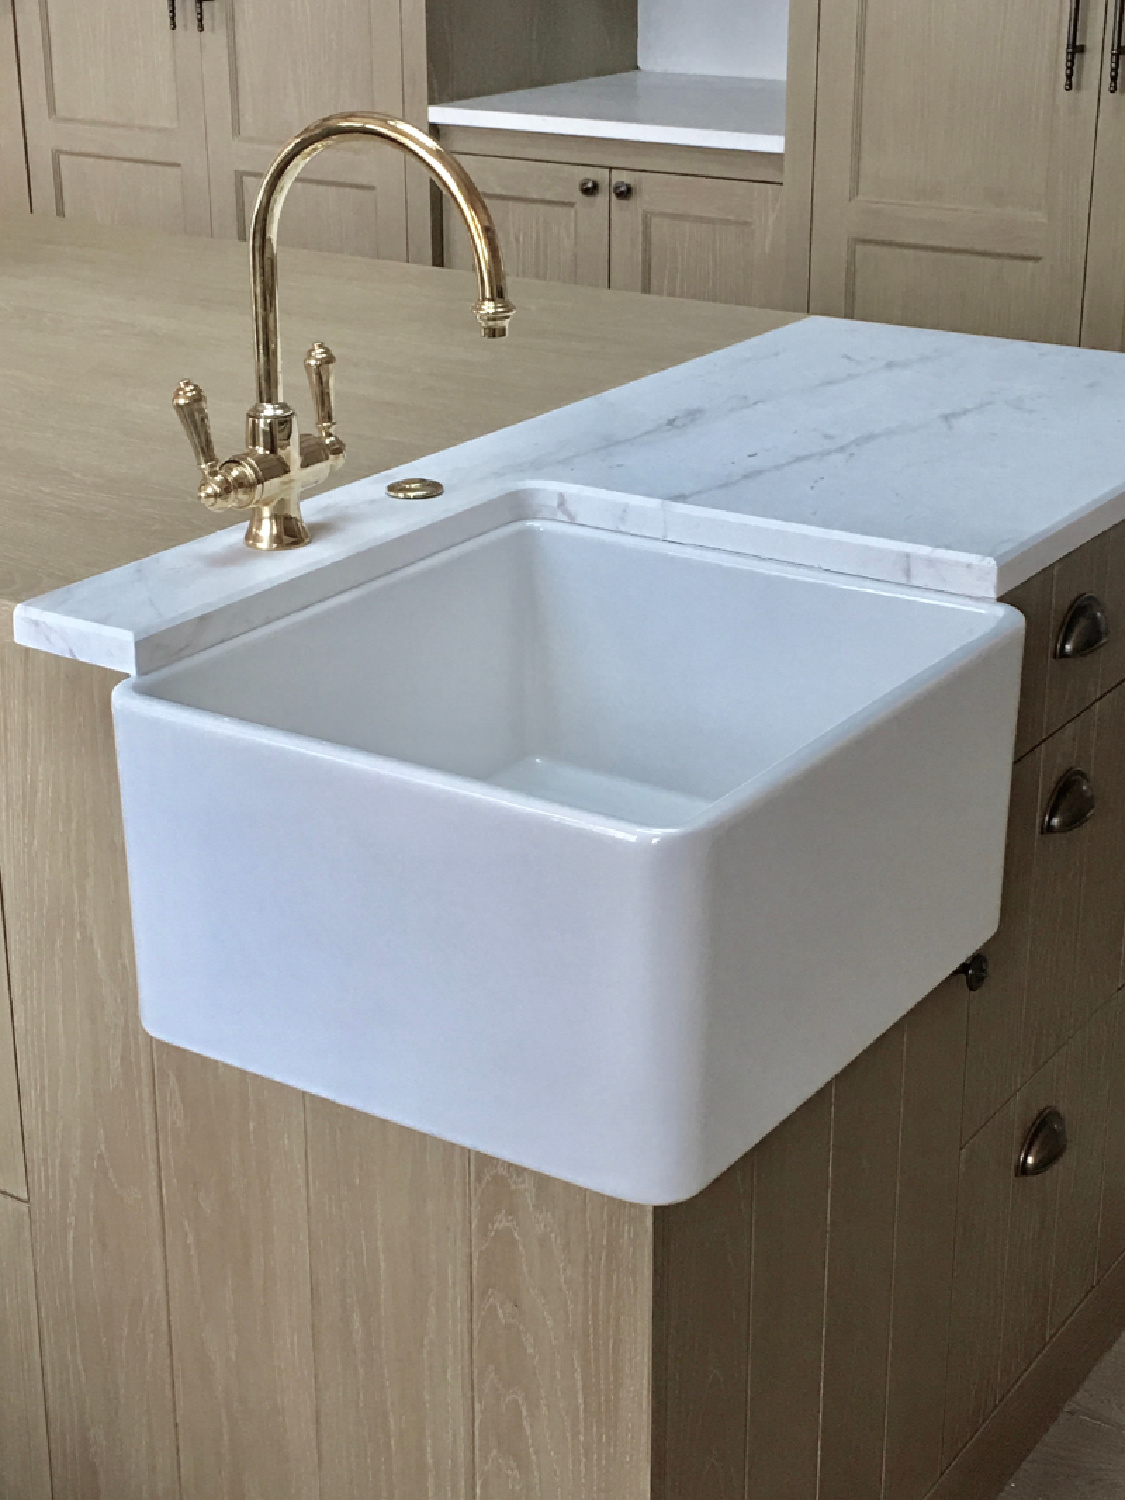 Detail of secondary sink in kitchen - Steve Giannetti designed modern Mediterranean Malibu home with white oak, natural finishes, limestone, and Old World style. #giannettihome #patinastyle #patinahomes